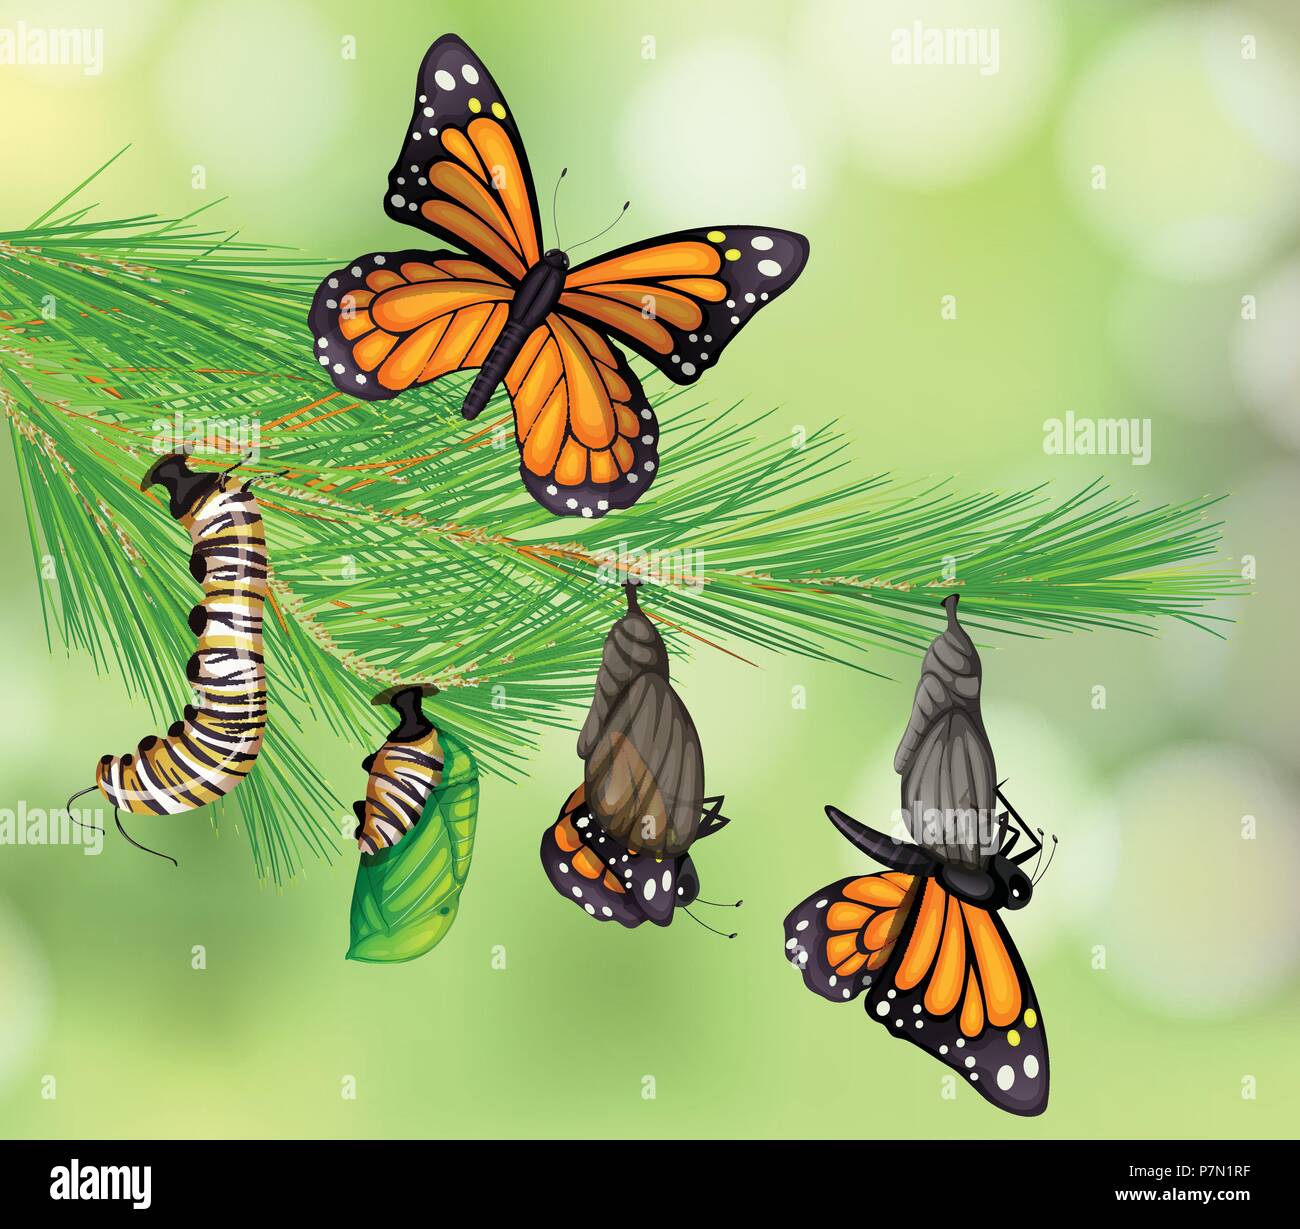 A Set of Butterfly Life Cycle illustration Stock Vector